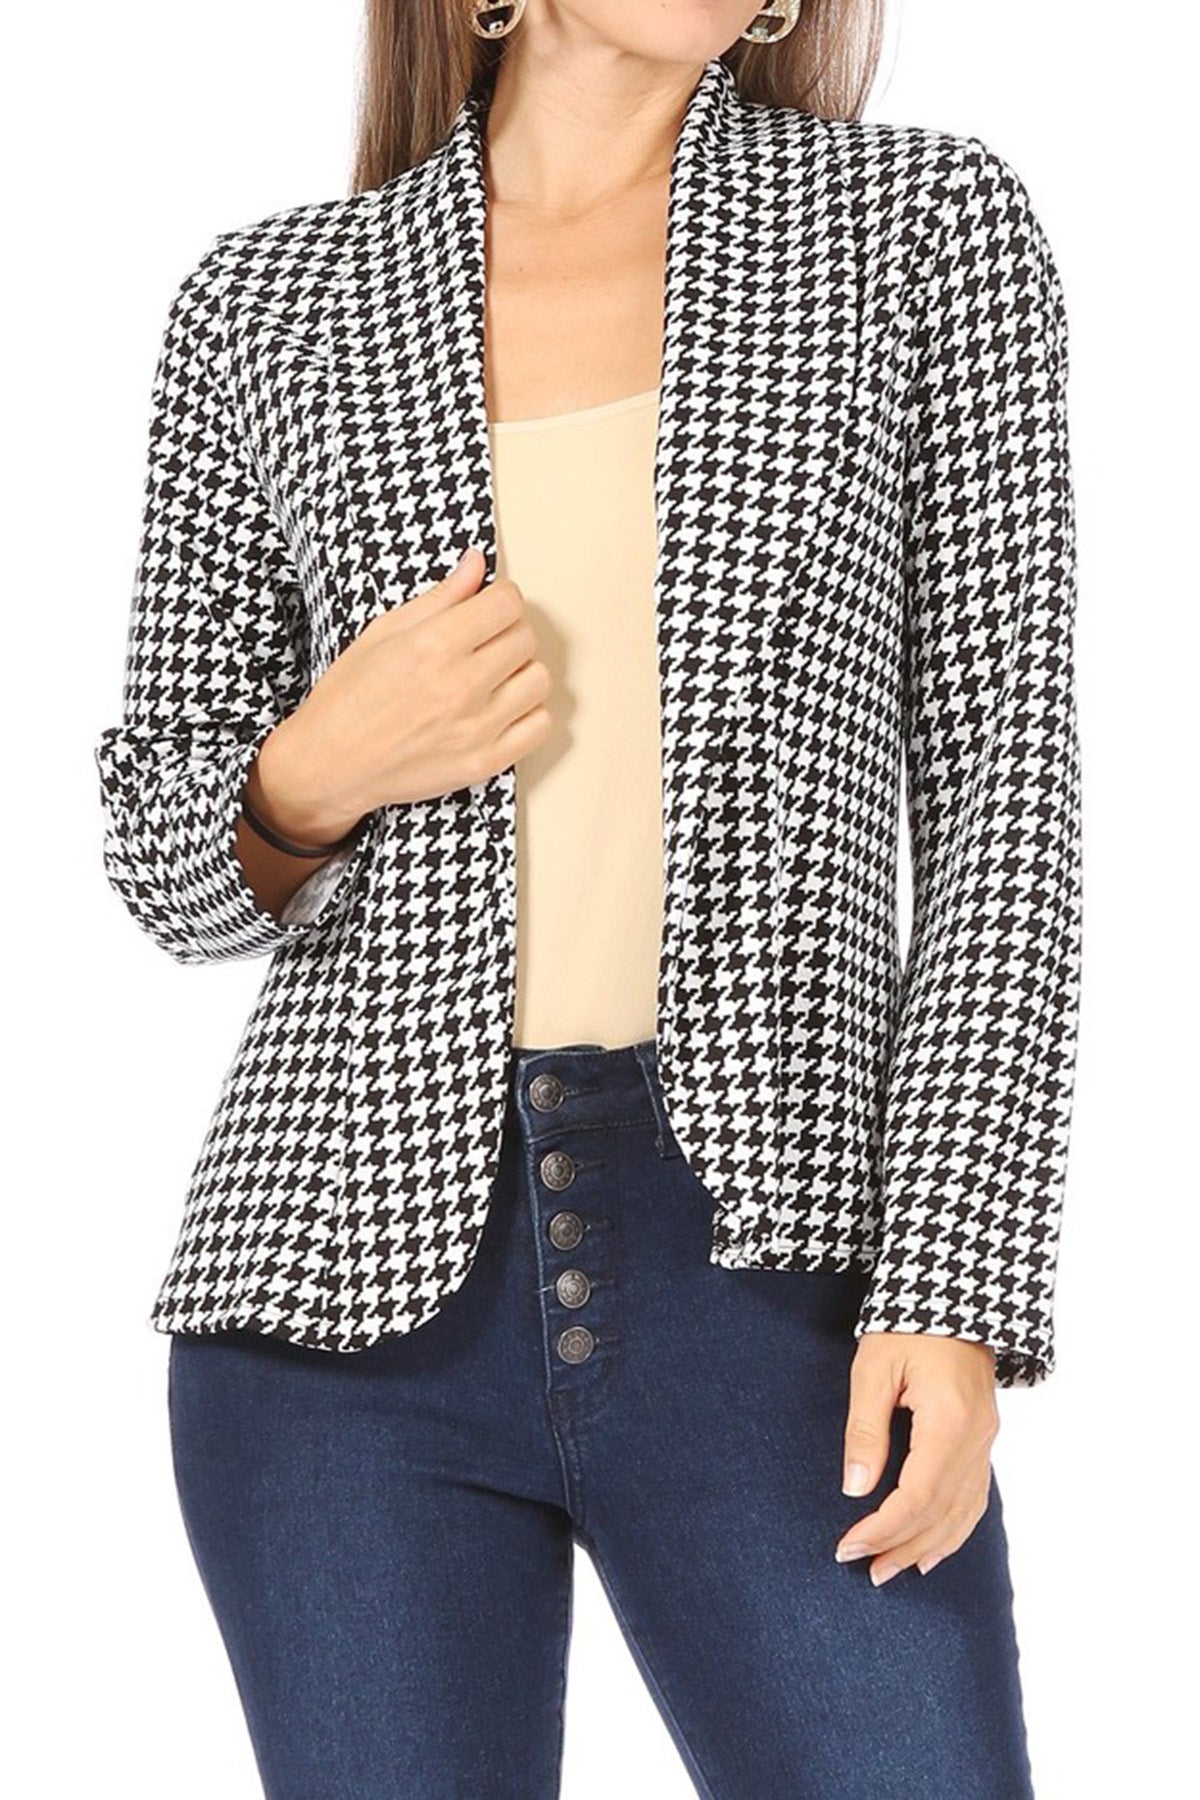 Women's Casual Print Fitted Open Front Long Sleeves Office Blazer Jacket